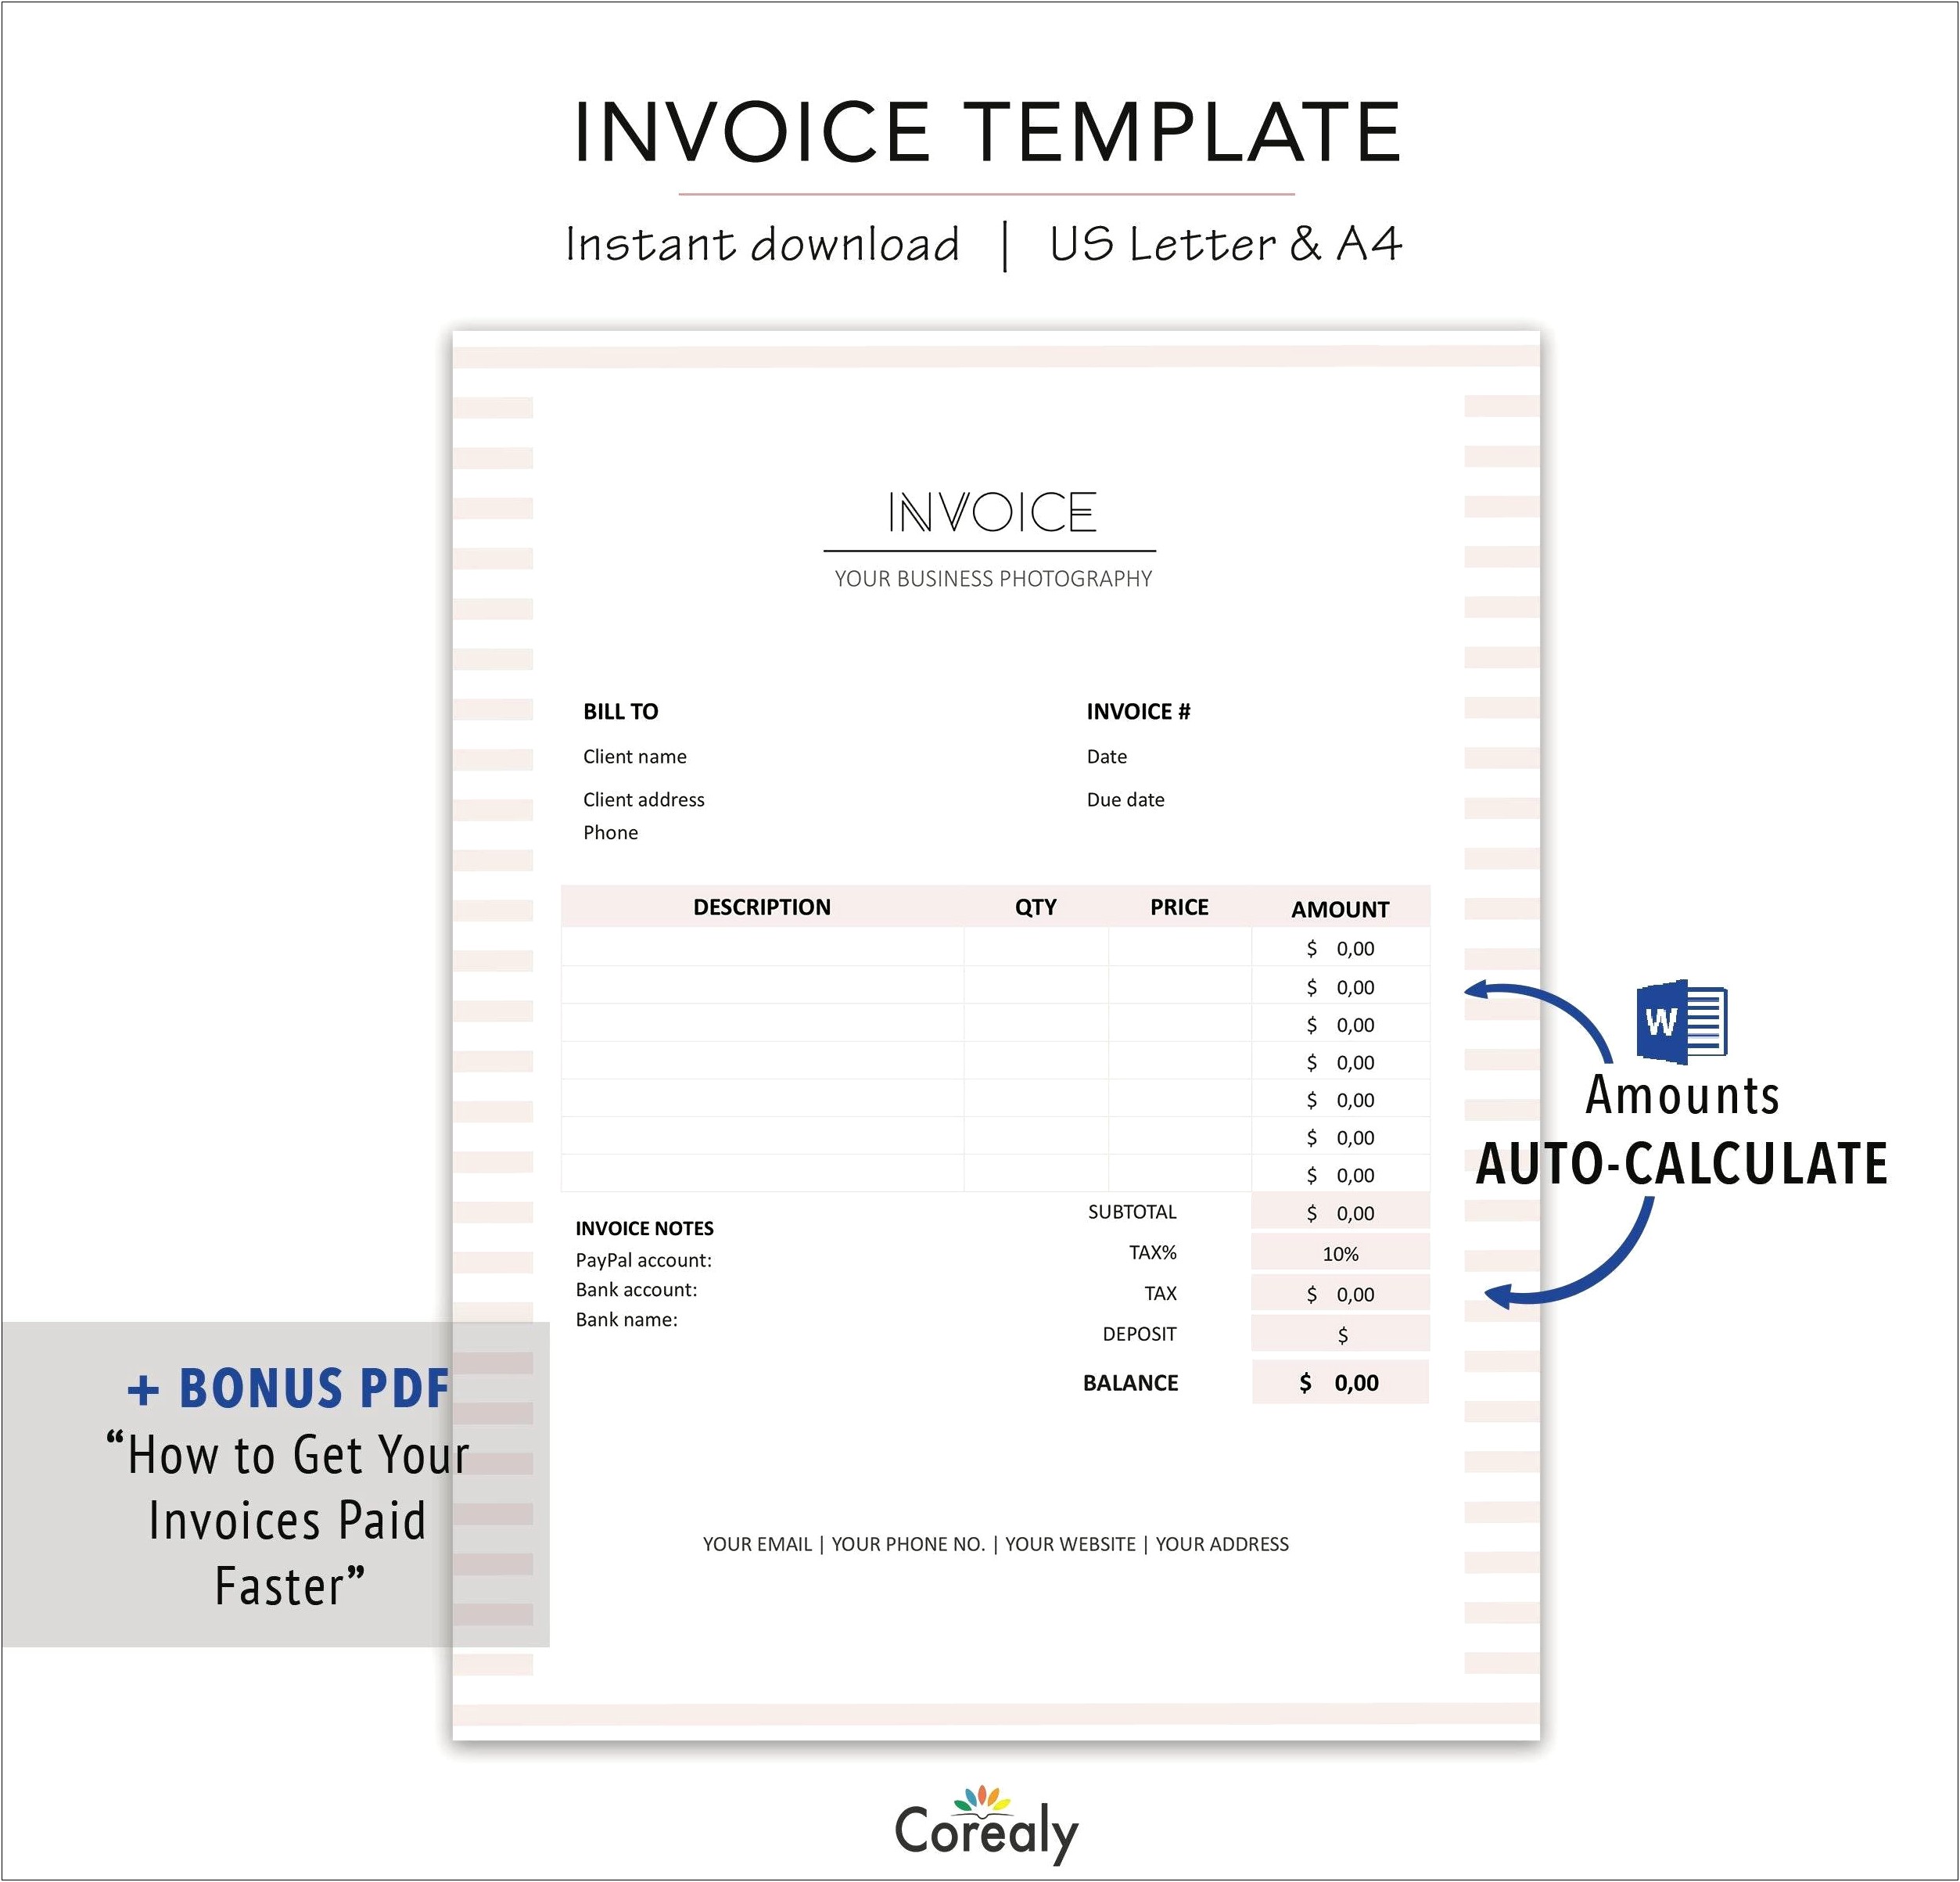 Microsoft Word Receipt Of Payment Template